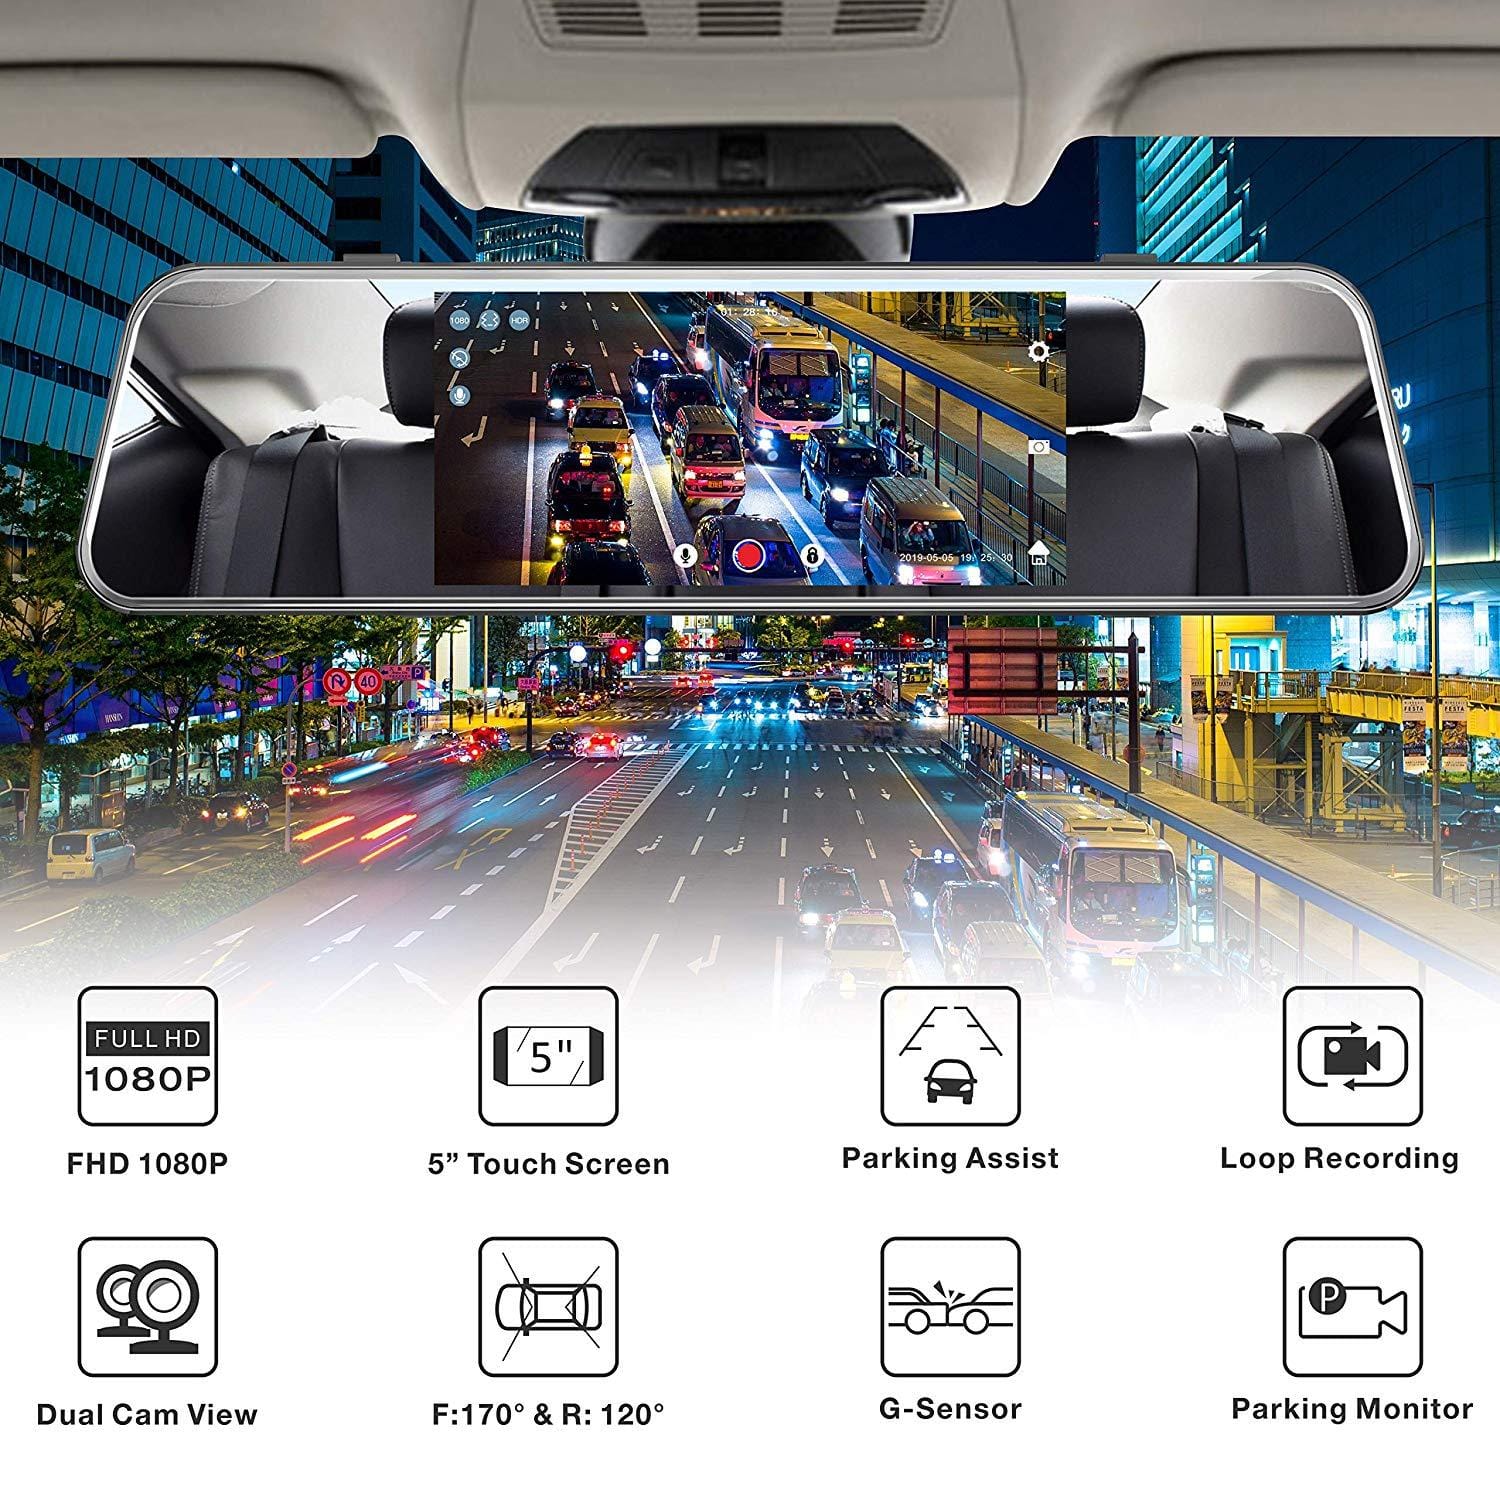 ARC4K Rear-View Mirror Camera - Shop for the Latest Dash Cam